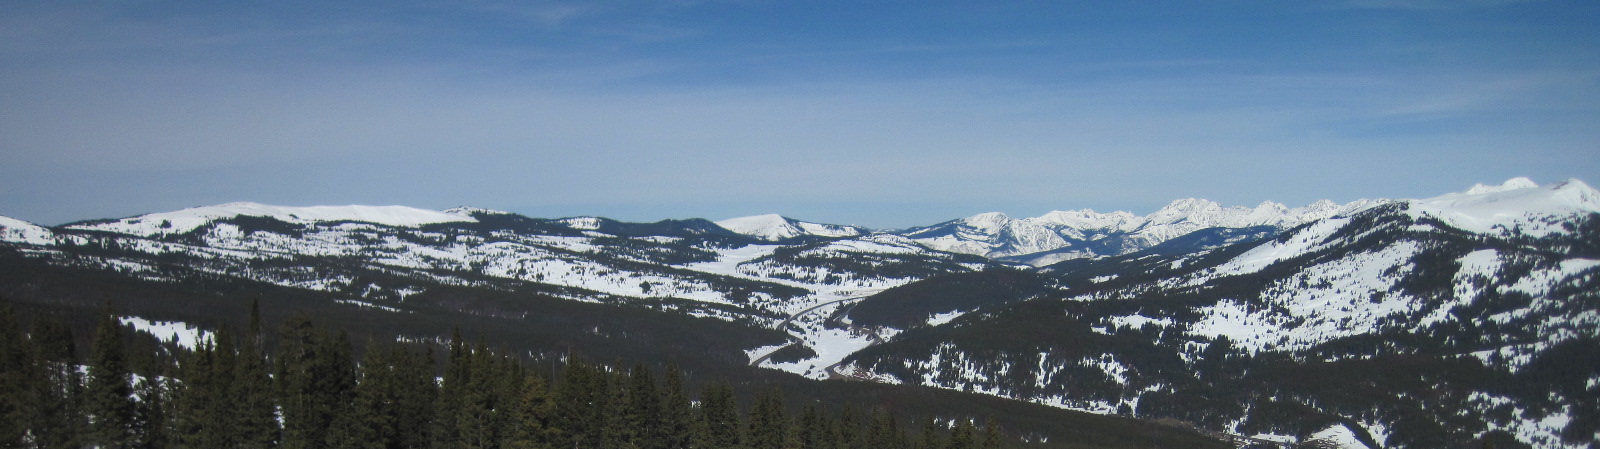 Vail Pass Panorama Number 2 from Copper Mountain